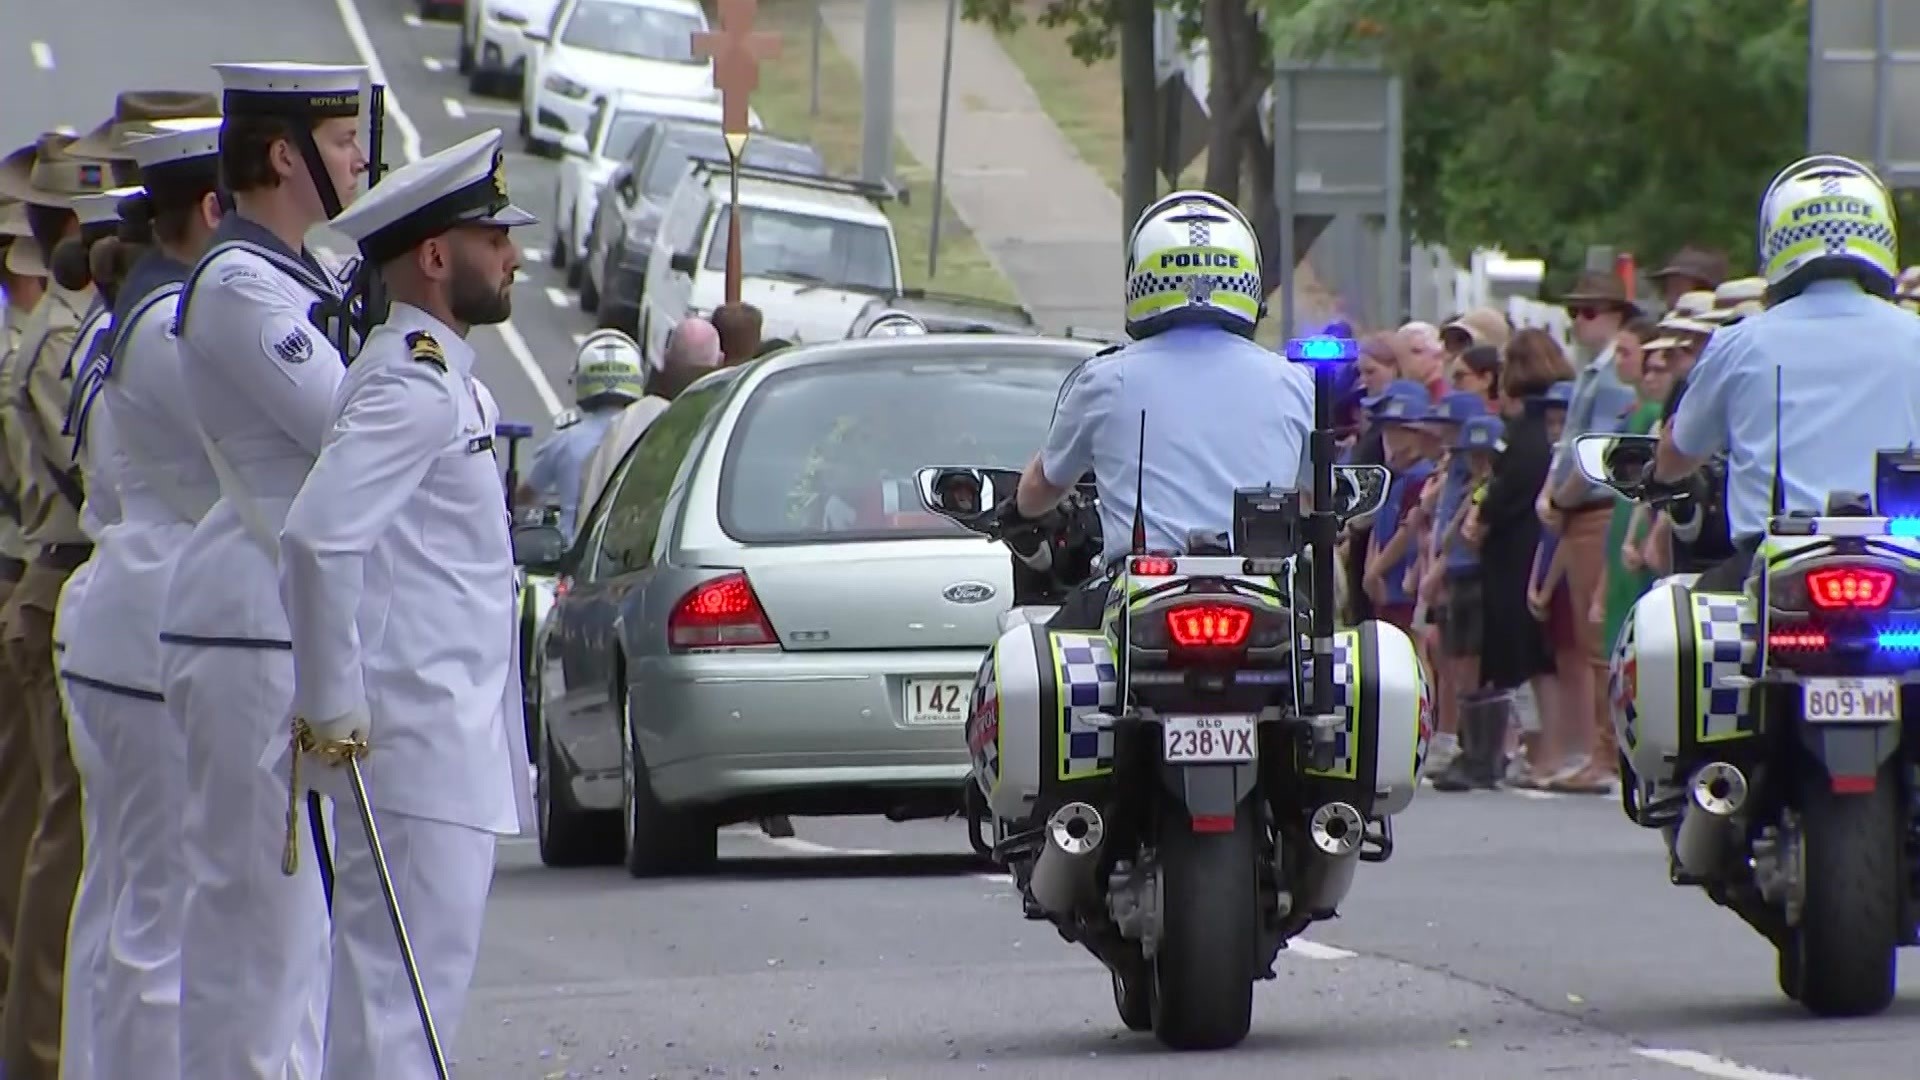 Bill Hayden's coffin leaves the church in a herse with flowers.